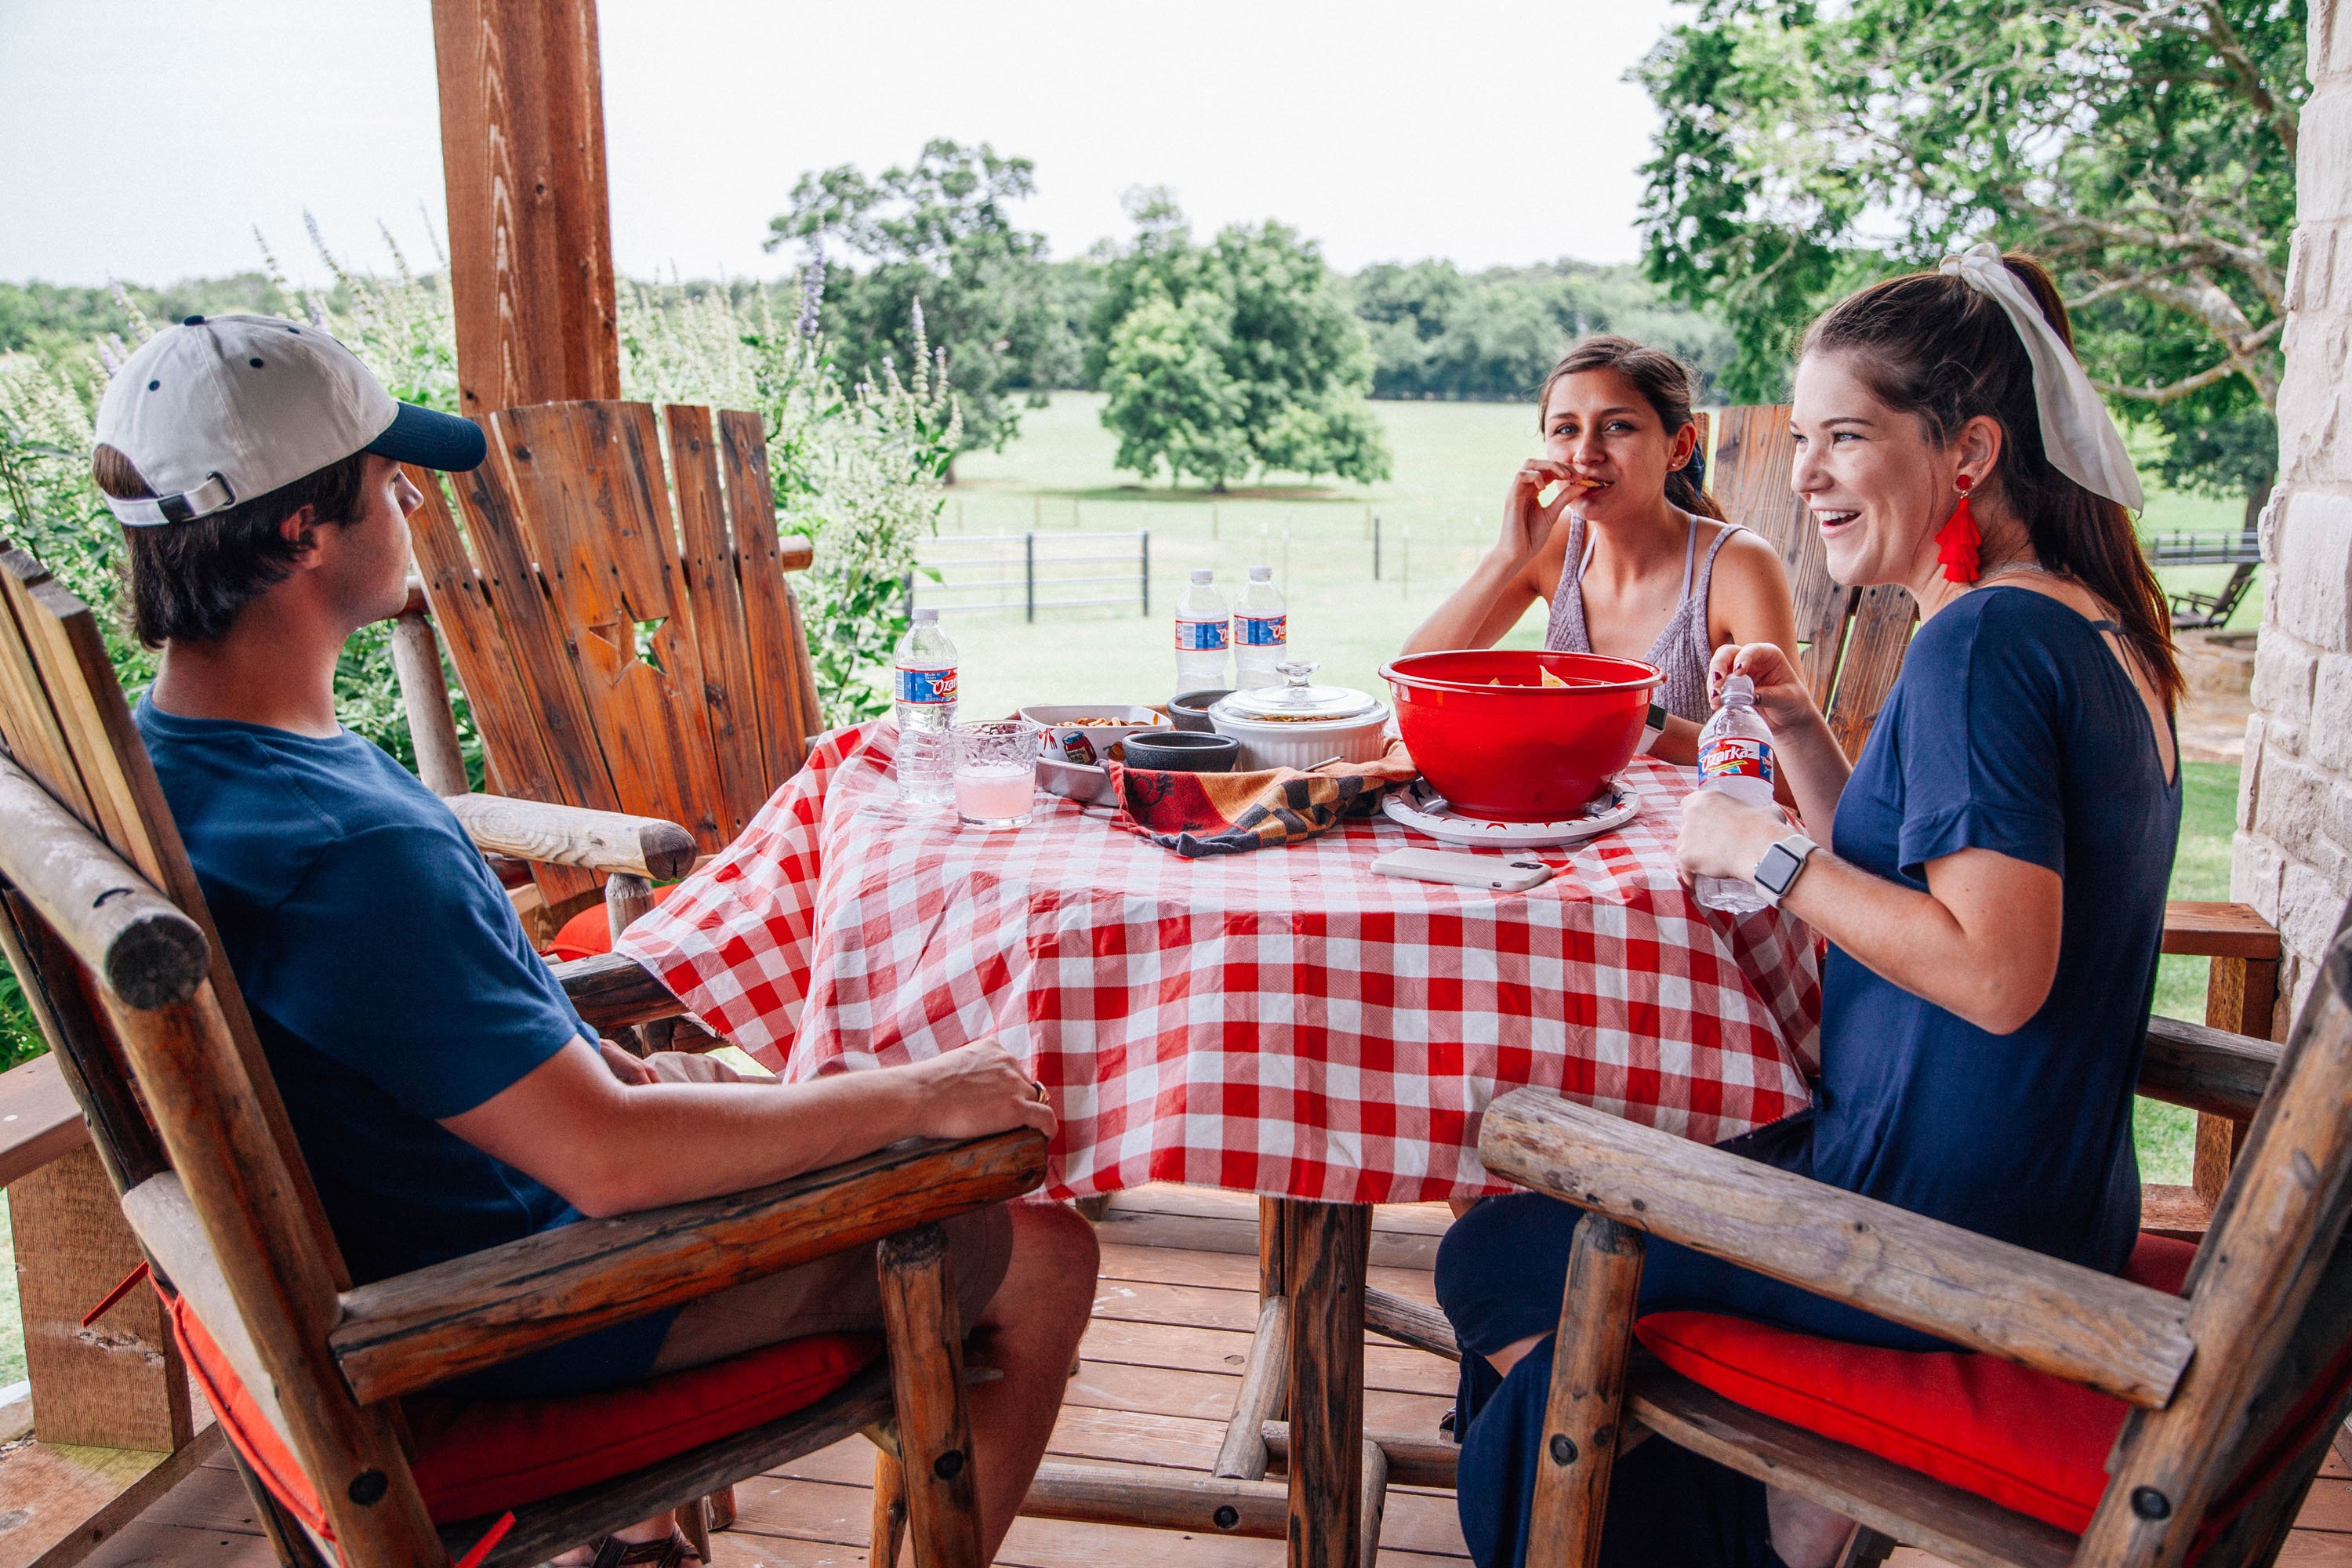 Group of people eating at outdoors picnic table